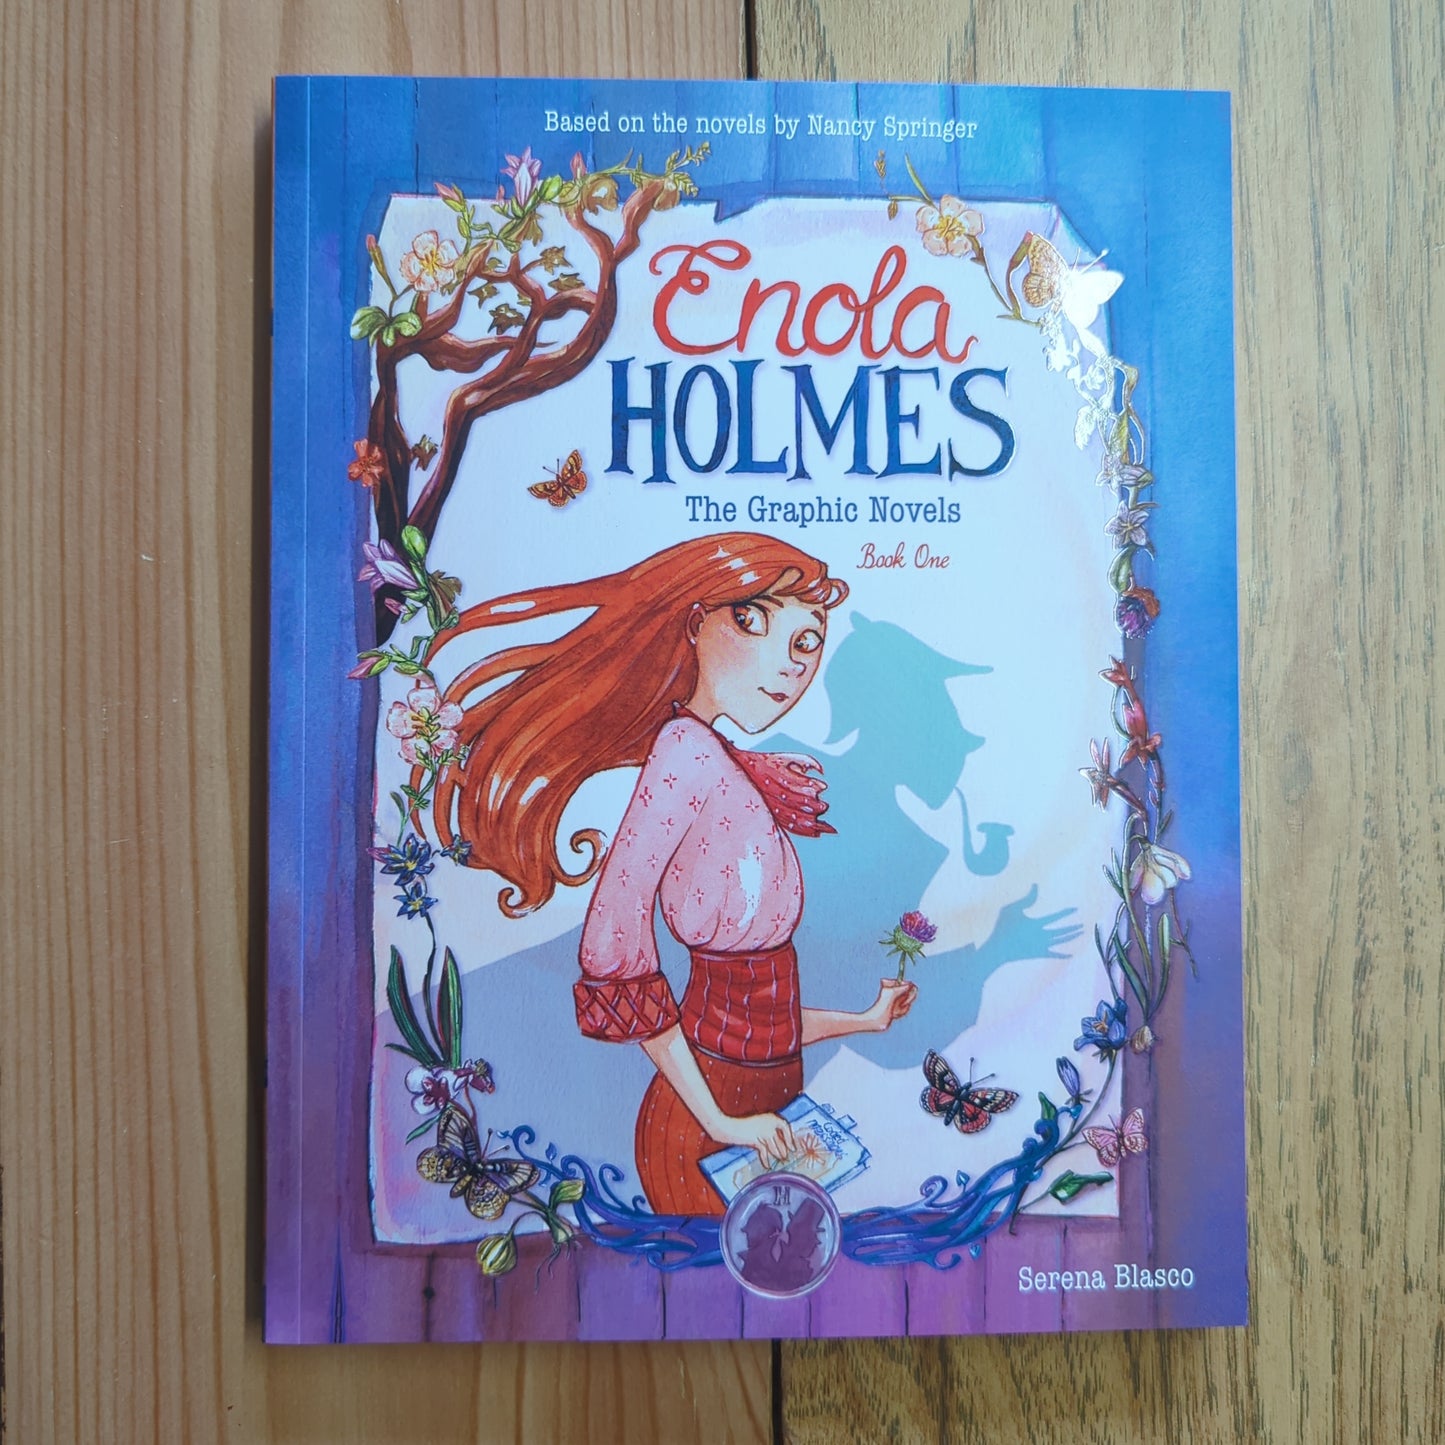 Enola Holmes: The Graphic Novels (Book One)